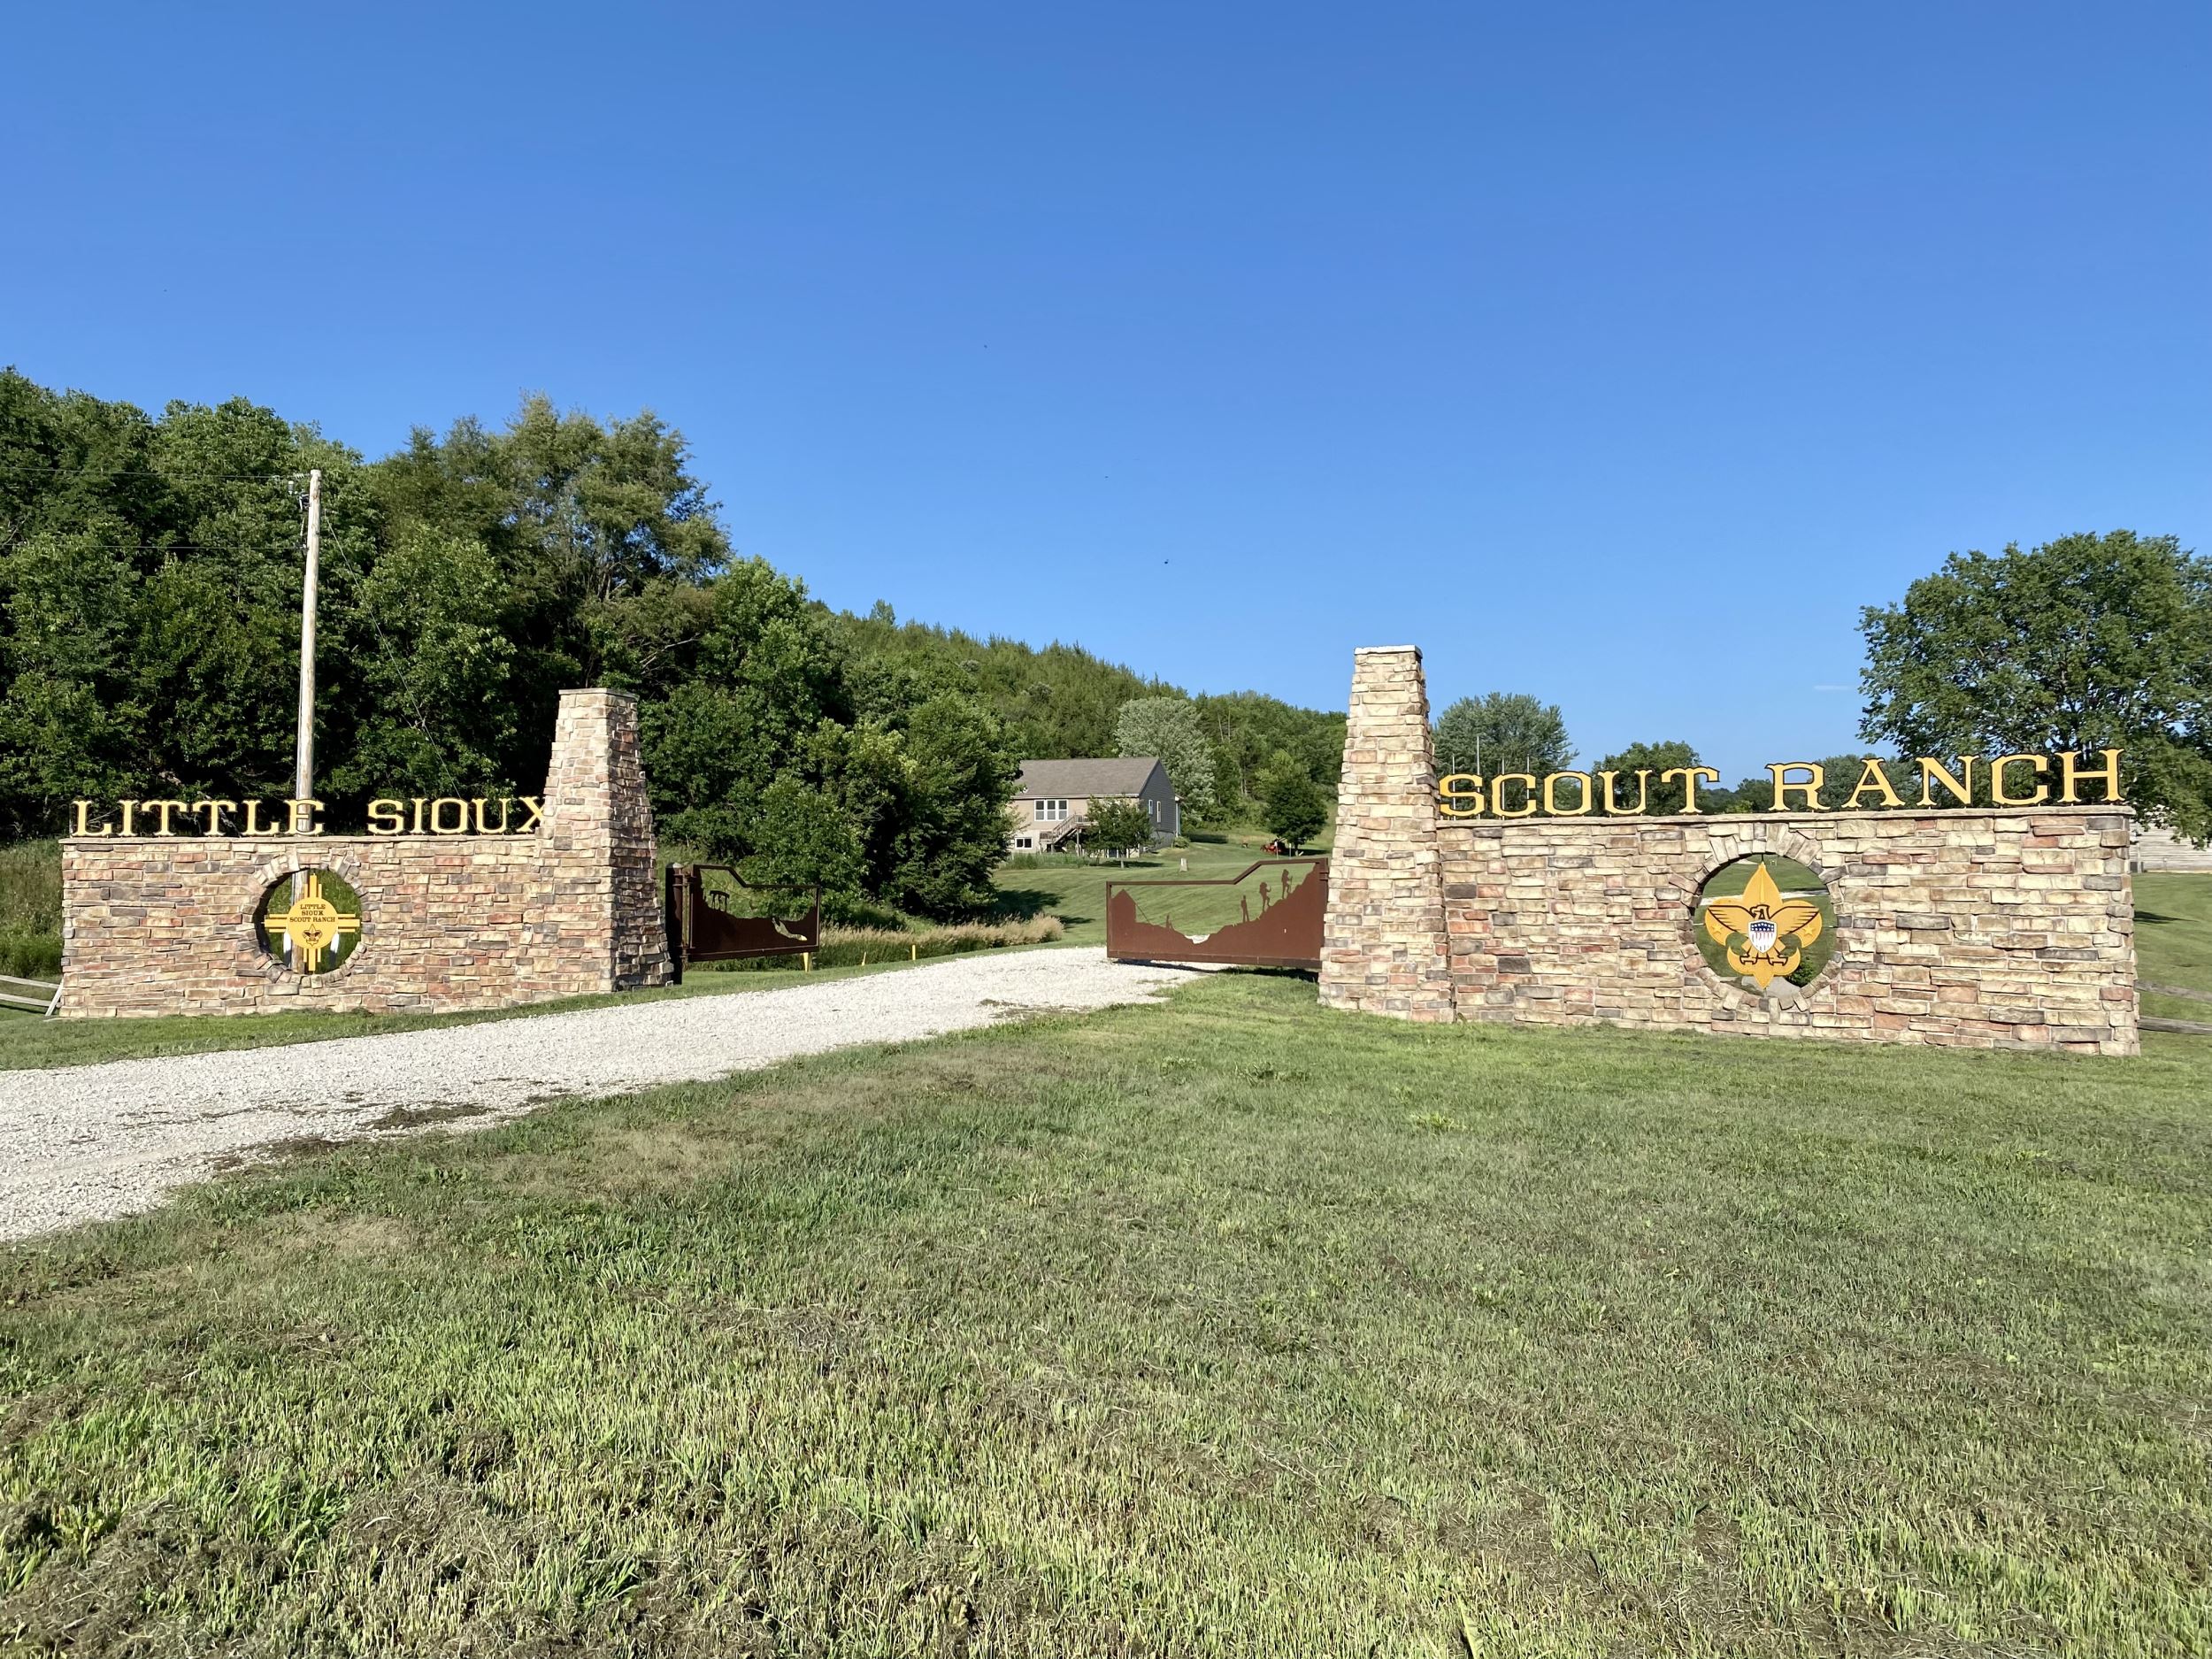 Entrance to the Little Sioux Scout Ranch